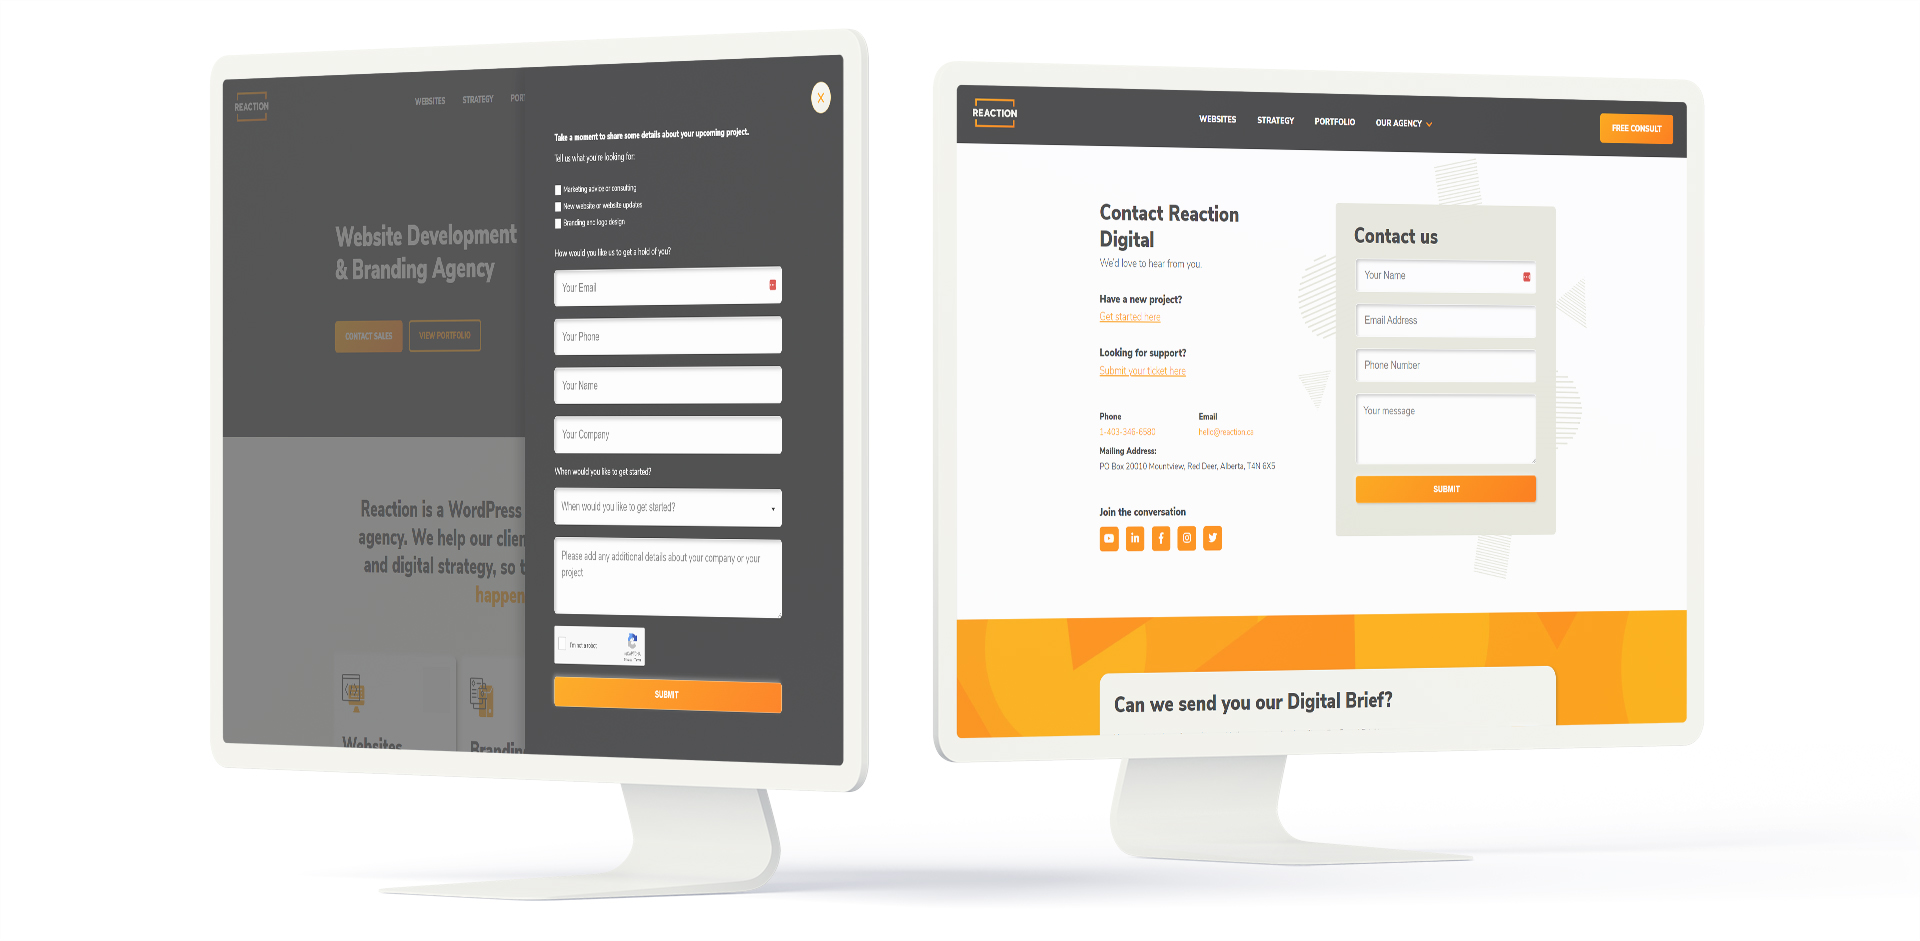 Dual-screen presentation of Reaction Digital's website pages, with the left screen displaying the homepage featuring 'Website Development & Branding Agency' services and contact options, and the right screen showing a 'Contact us' form, company contact details, social media links, and an invitation to receive a digital brief.